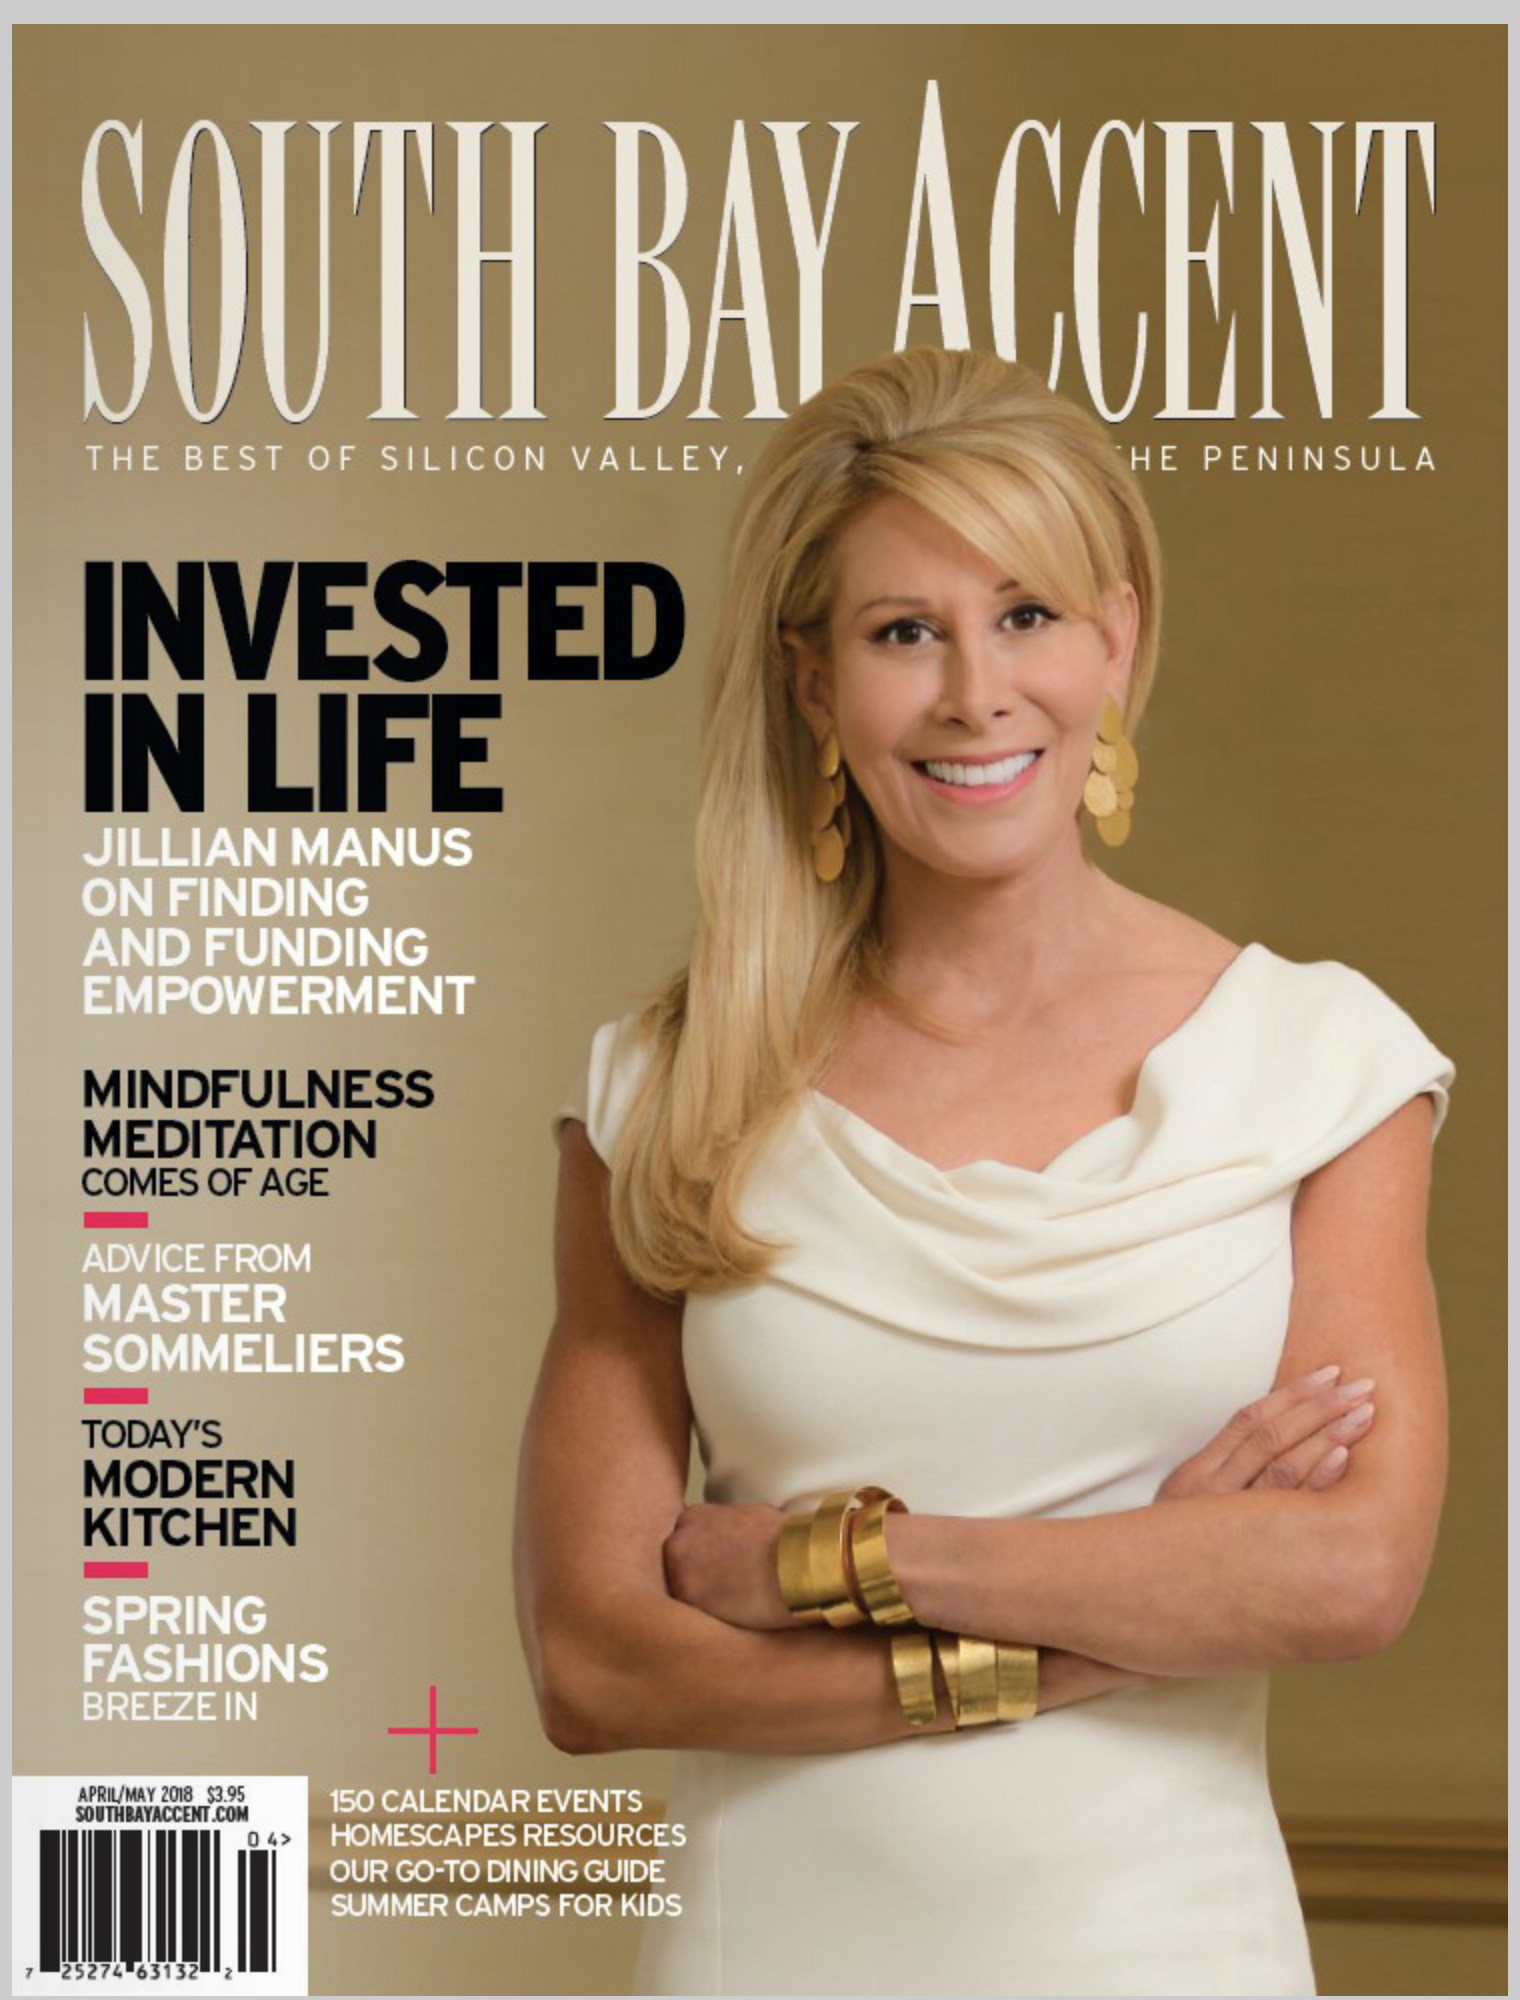 Southbay accent cover